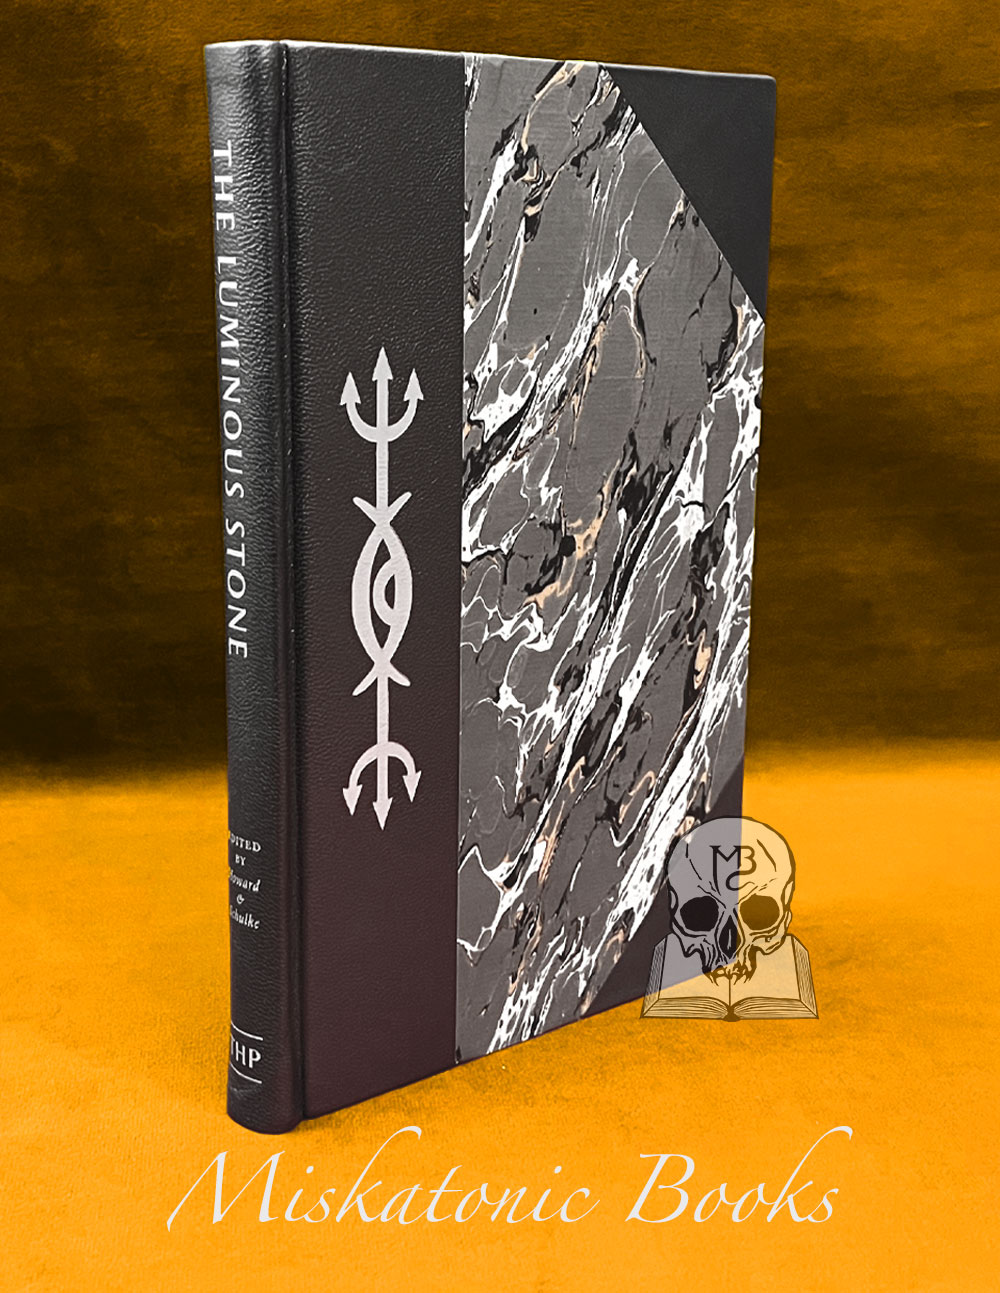 THE LUMINOUS STONE: LUCIFER IN WESTERN ESOTERICISM by Michael Howard & Daniel Schulke (Deluxe Quarter Limited Edition Hardcover)